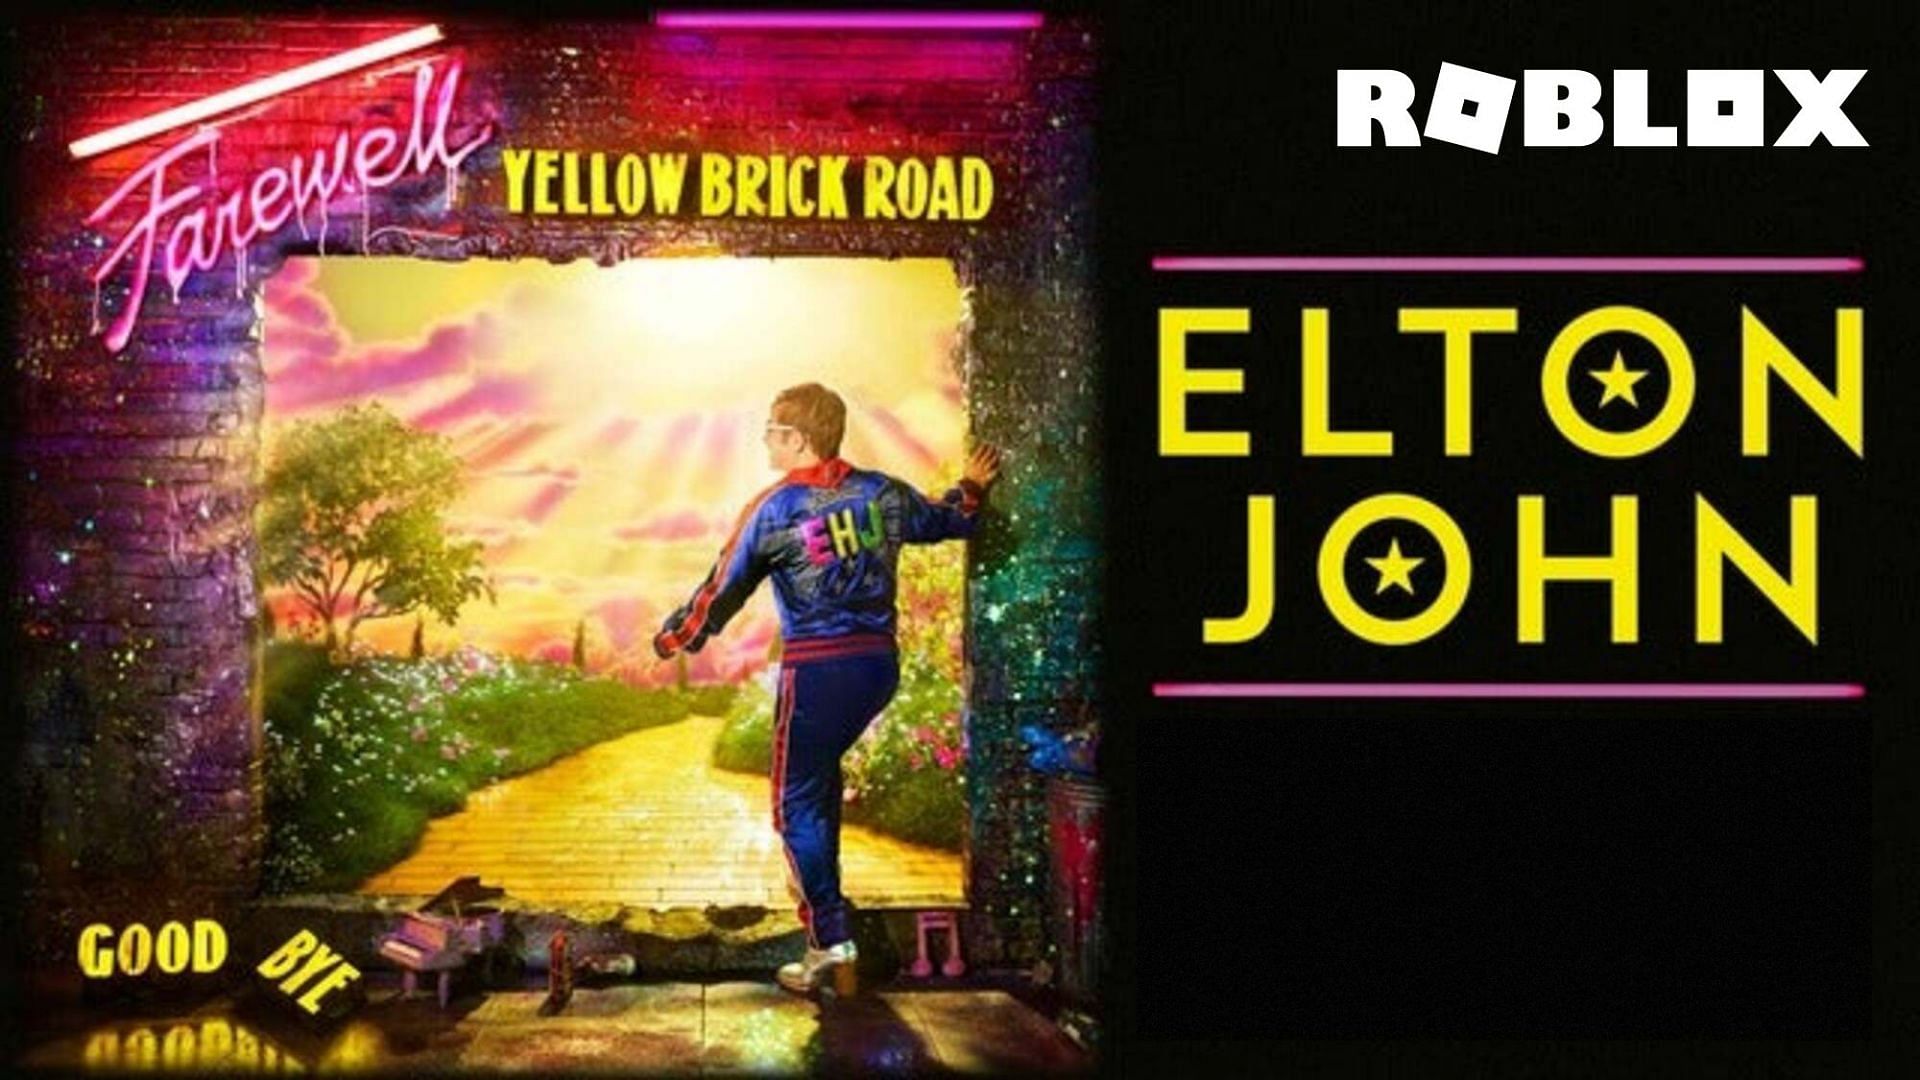 Roblox FREE Items in Elton John's Experience, 👍 LIKE for more ROBLOX  VIDEOS 🔥 FOLLOW for being AWESOME ▻ Roblox Group ▻   ▻  ▻, By LectPlays